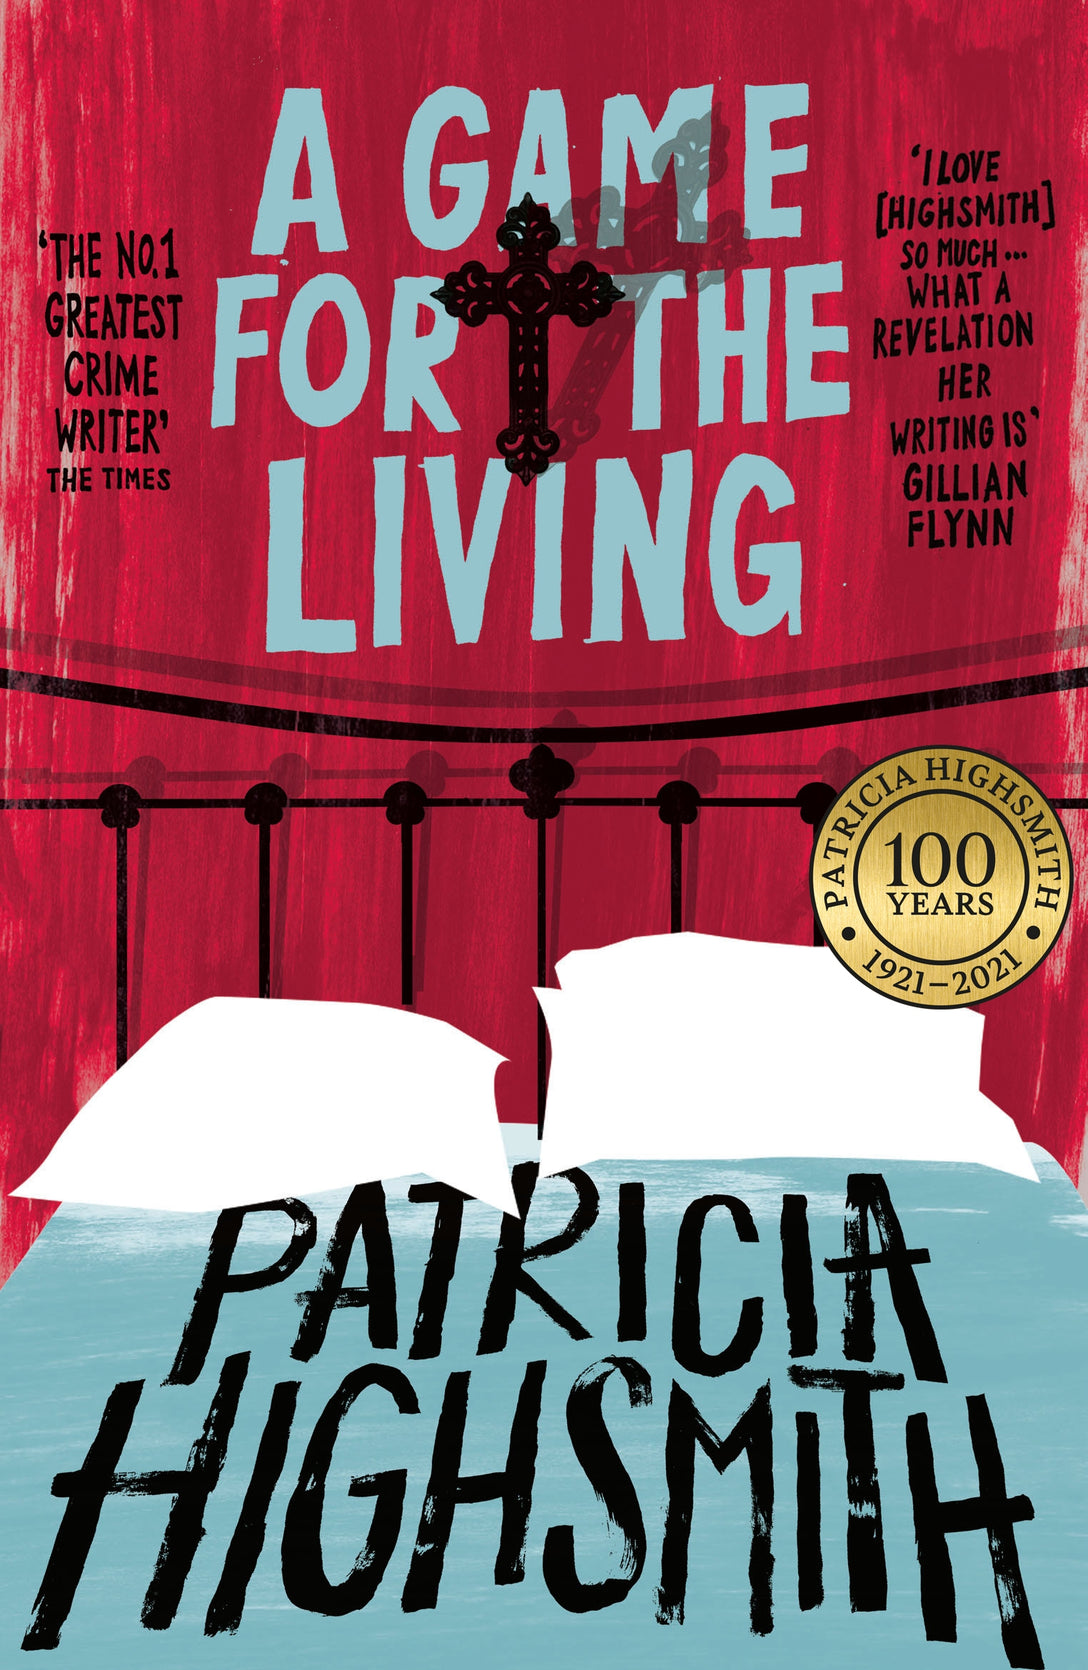 A Game for the Living by Patricia Highsmith